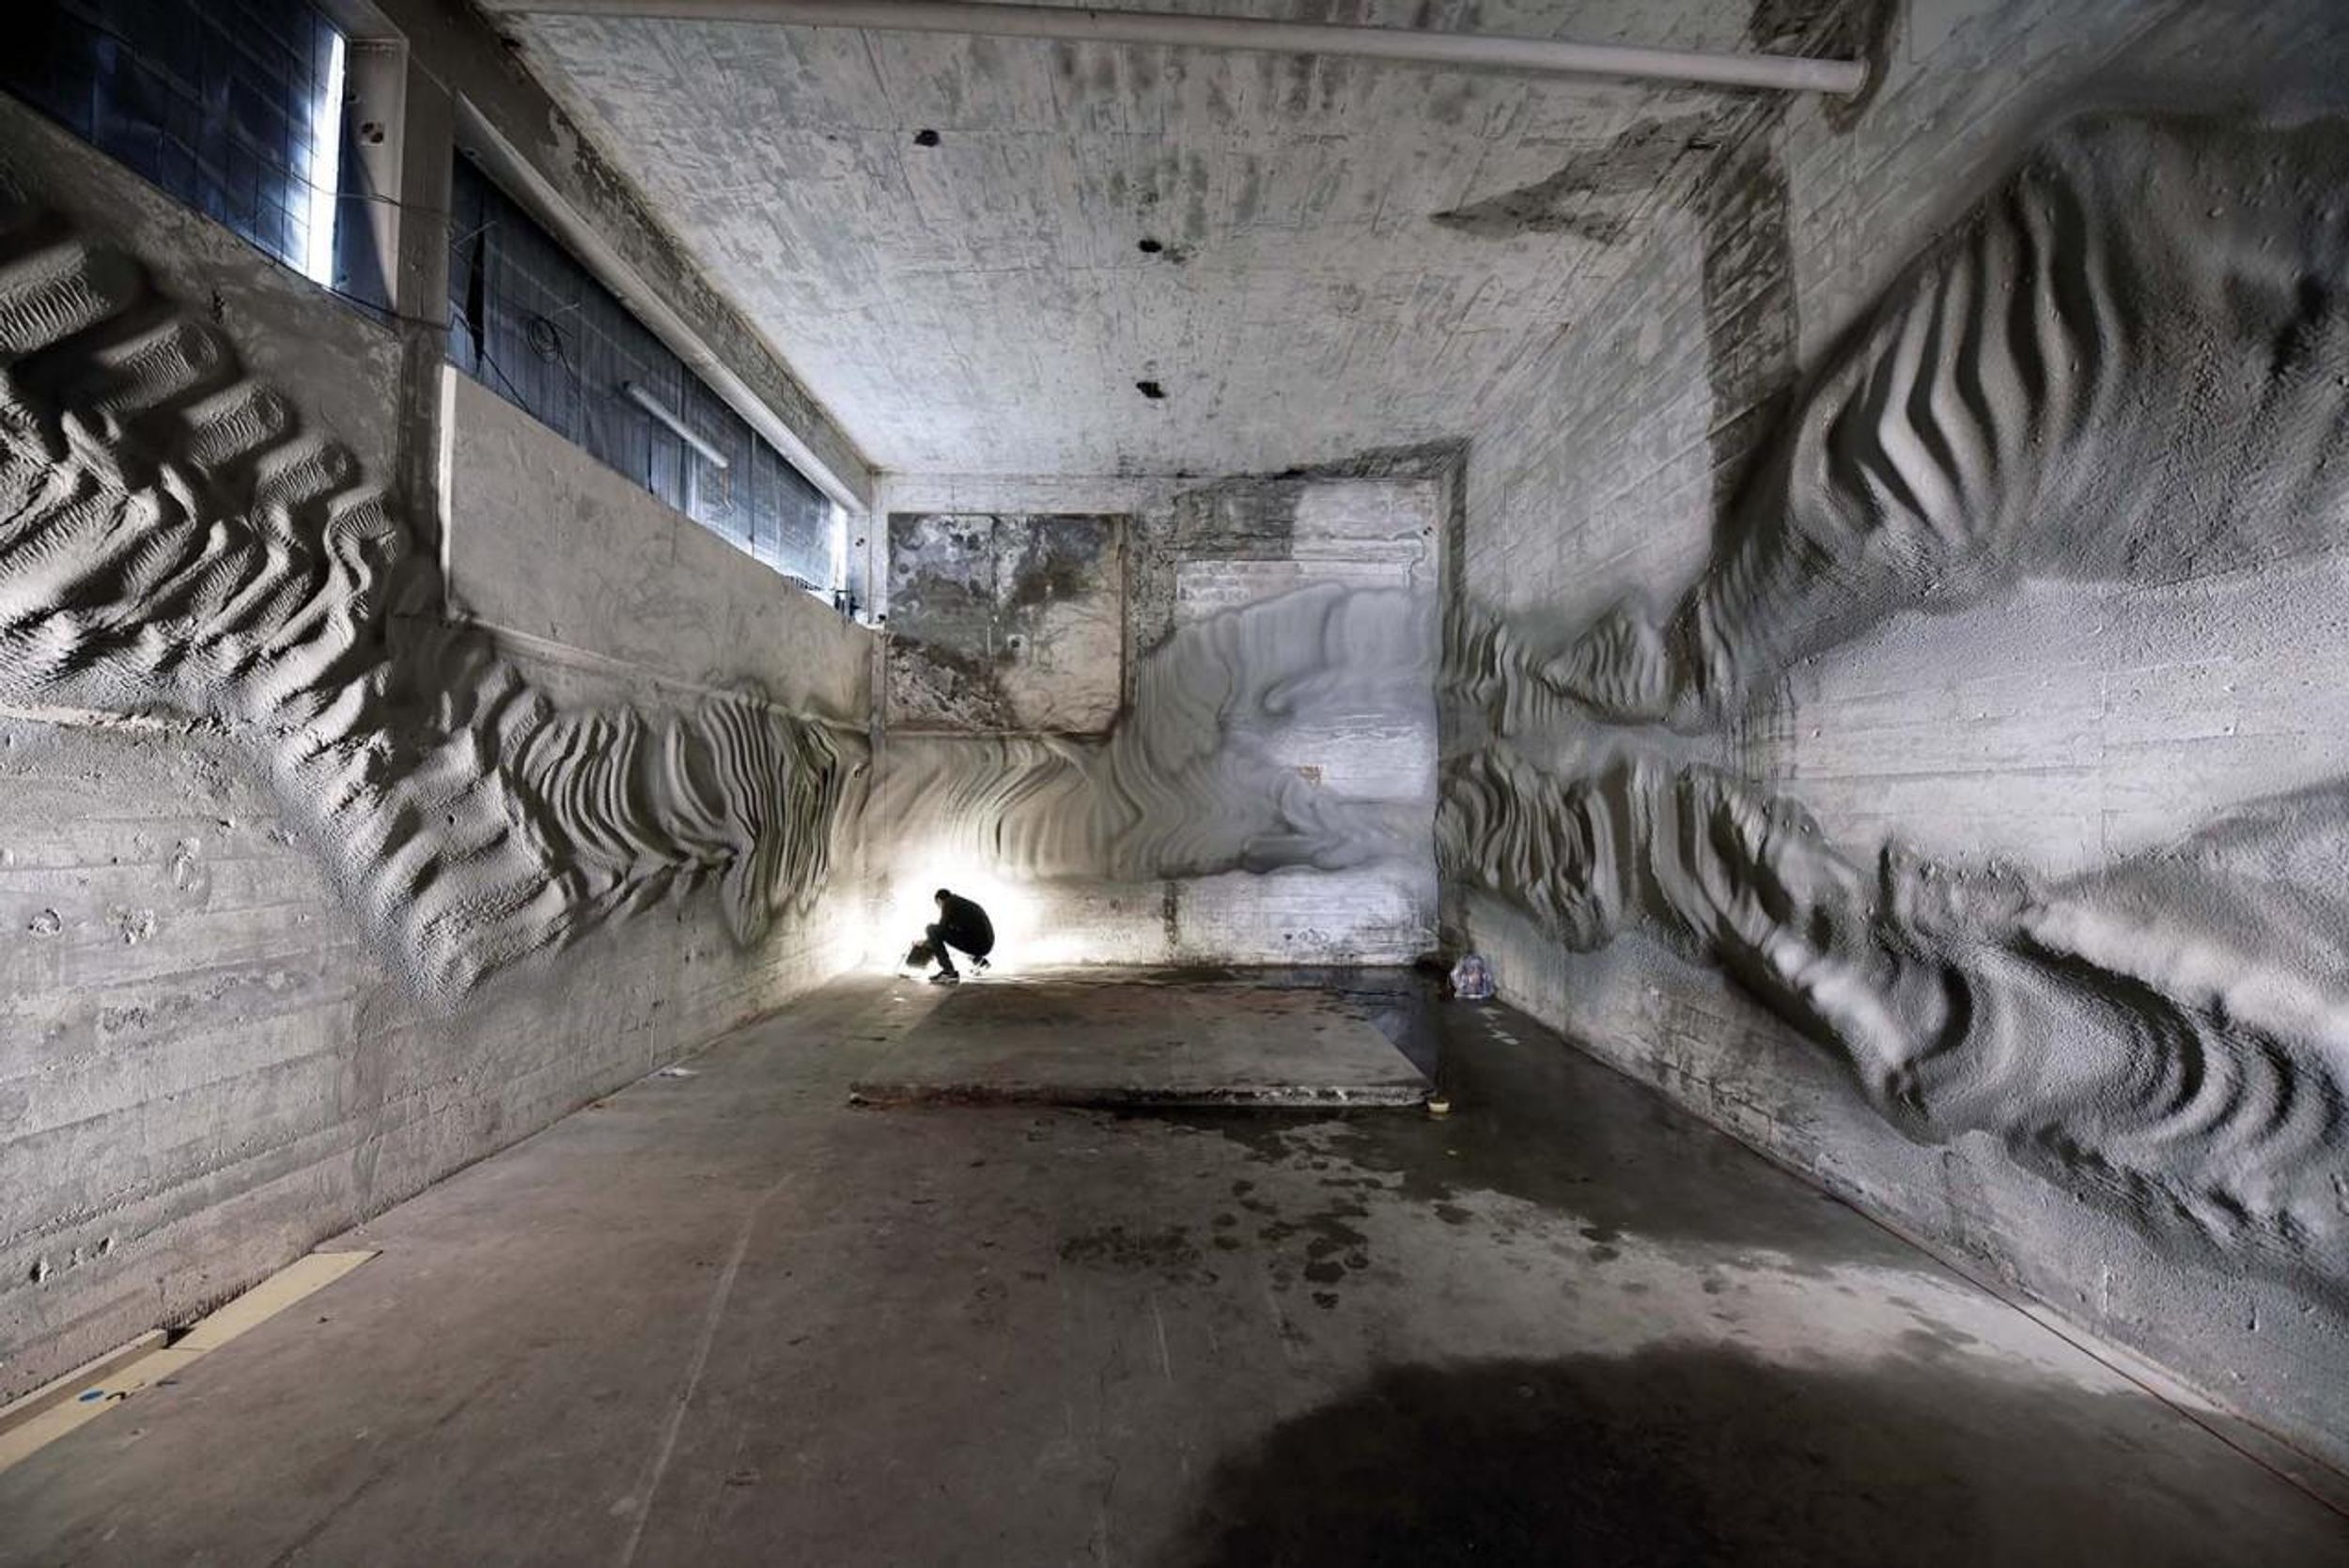 A large concrete room with intricate, flowing 3D designs made of plaster covering the walls